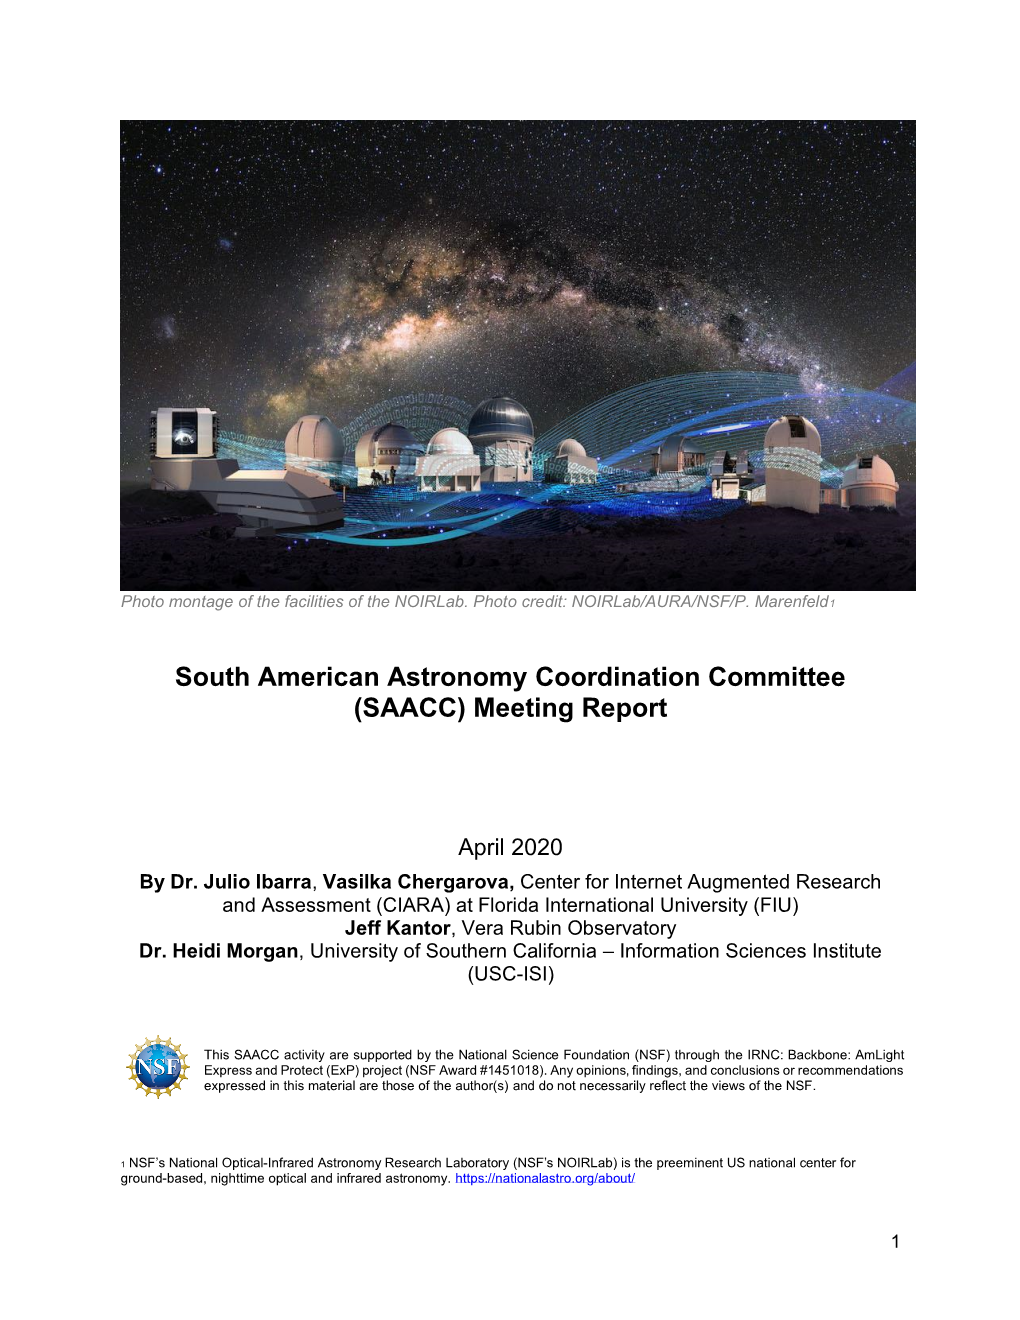 South American Astronomy Coordination Committee (SAACC) Meeting Report